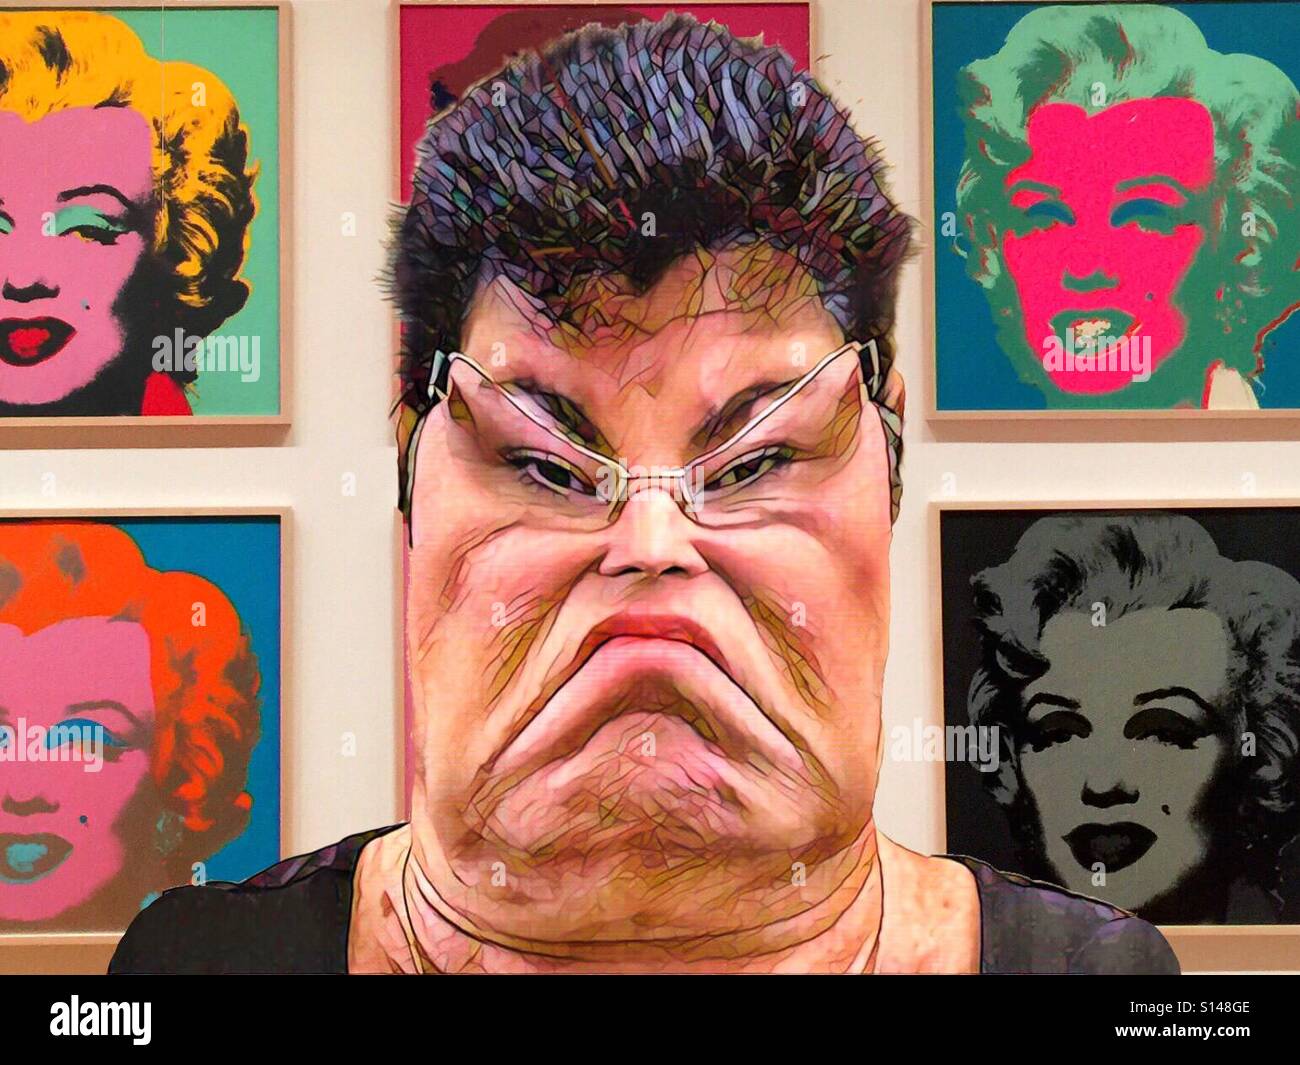 An abstract artwork featuring the square, distorted face of a dark haired Caucasian woman wearing glasses in front of an Andy Warhol series of pop art paintings of Marilyn Monroe Stock Photo